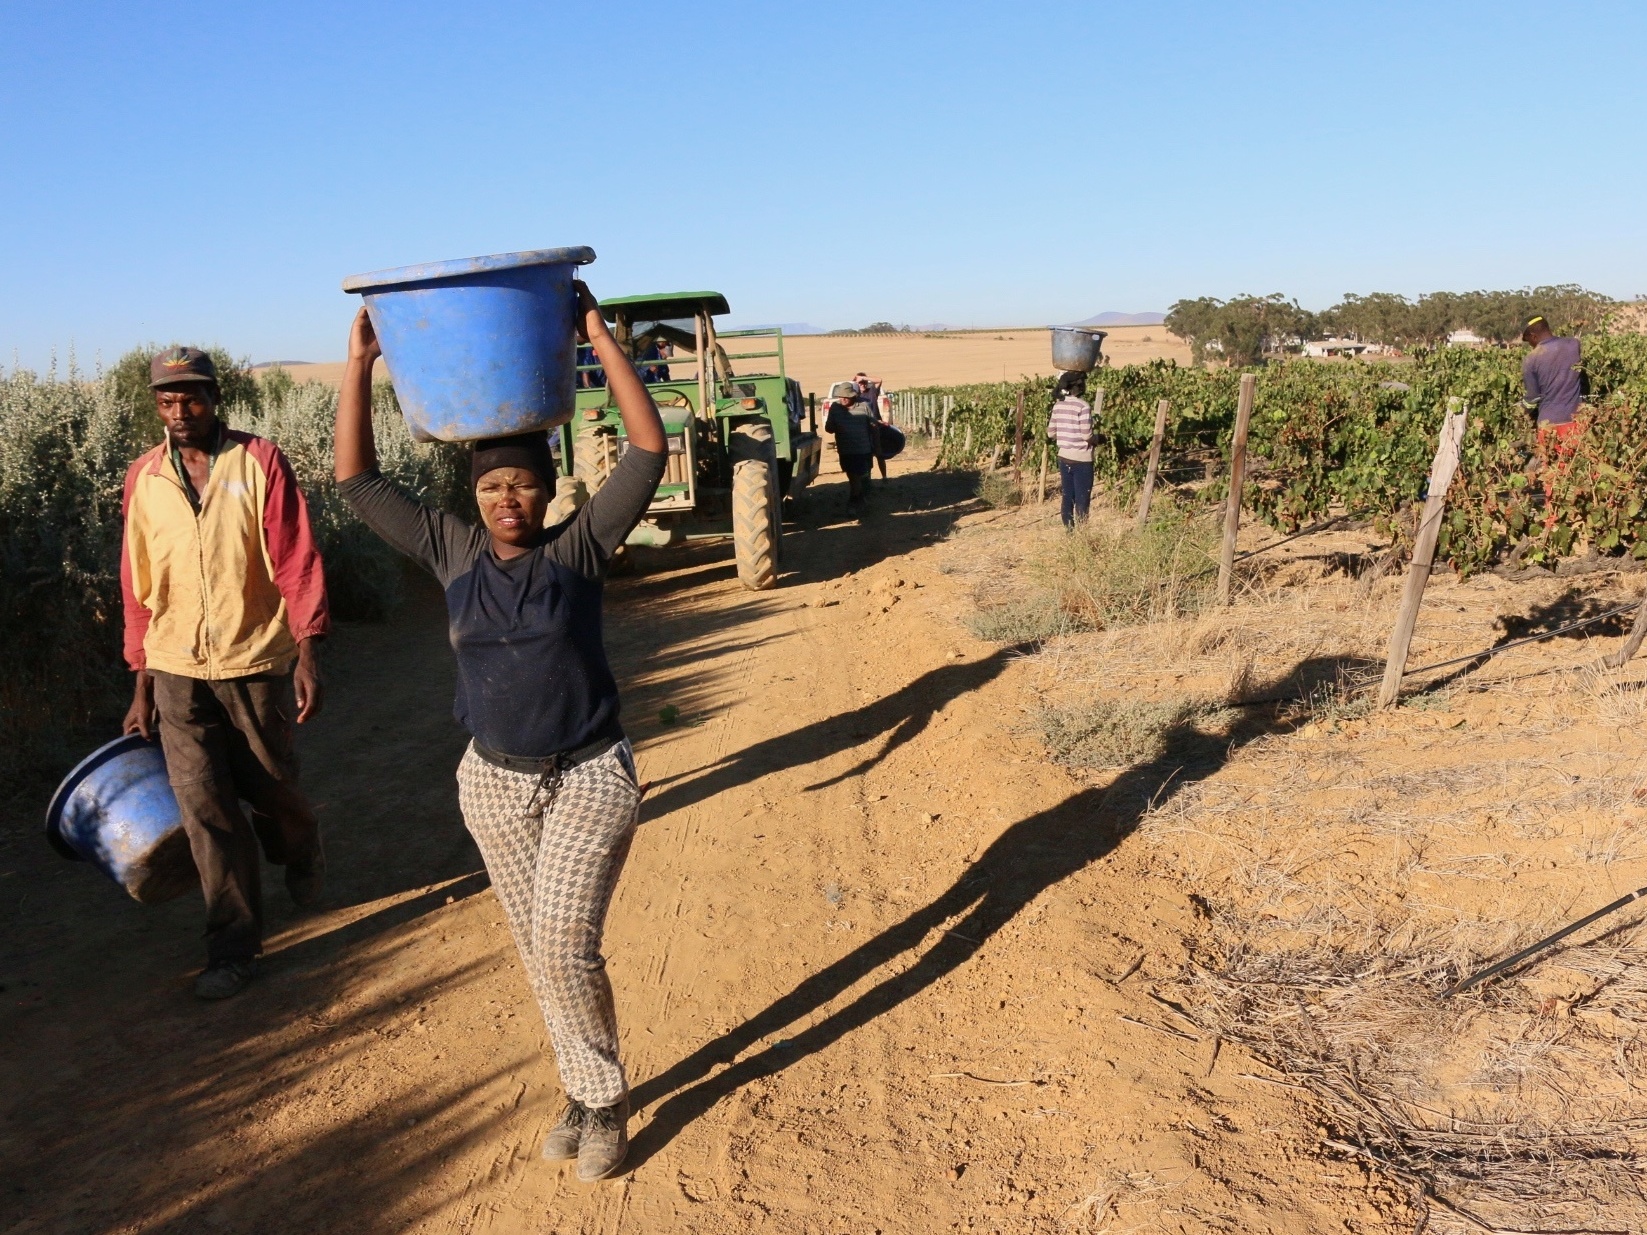 Seasonal workers help with the harvest at the Shiraz vineyard. Most come from South Africa or Zimbabwe.